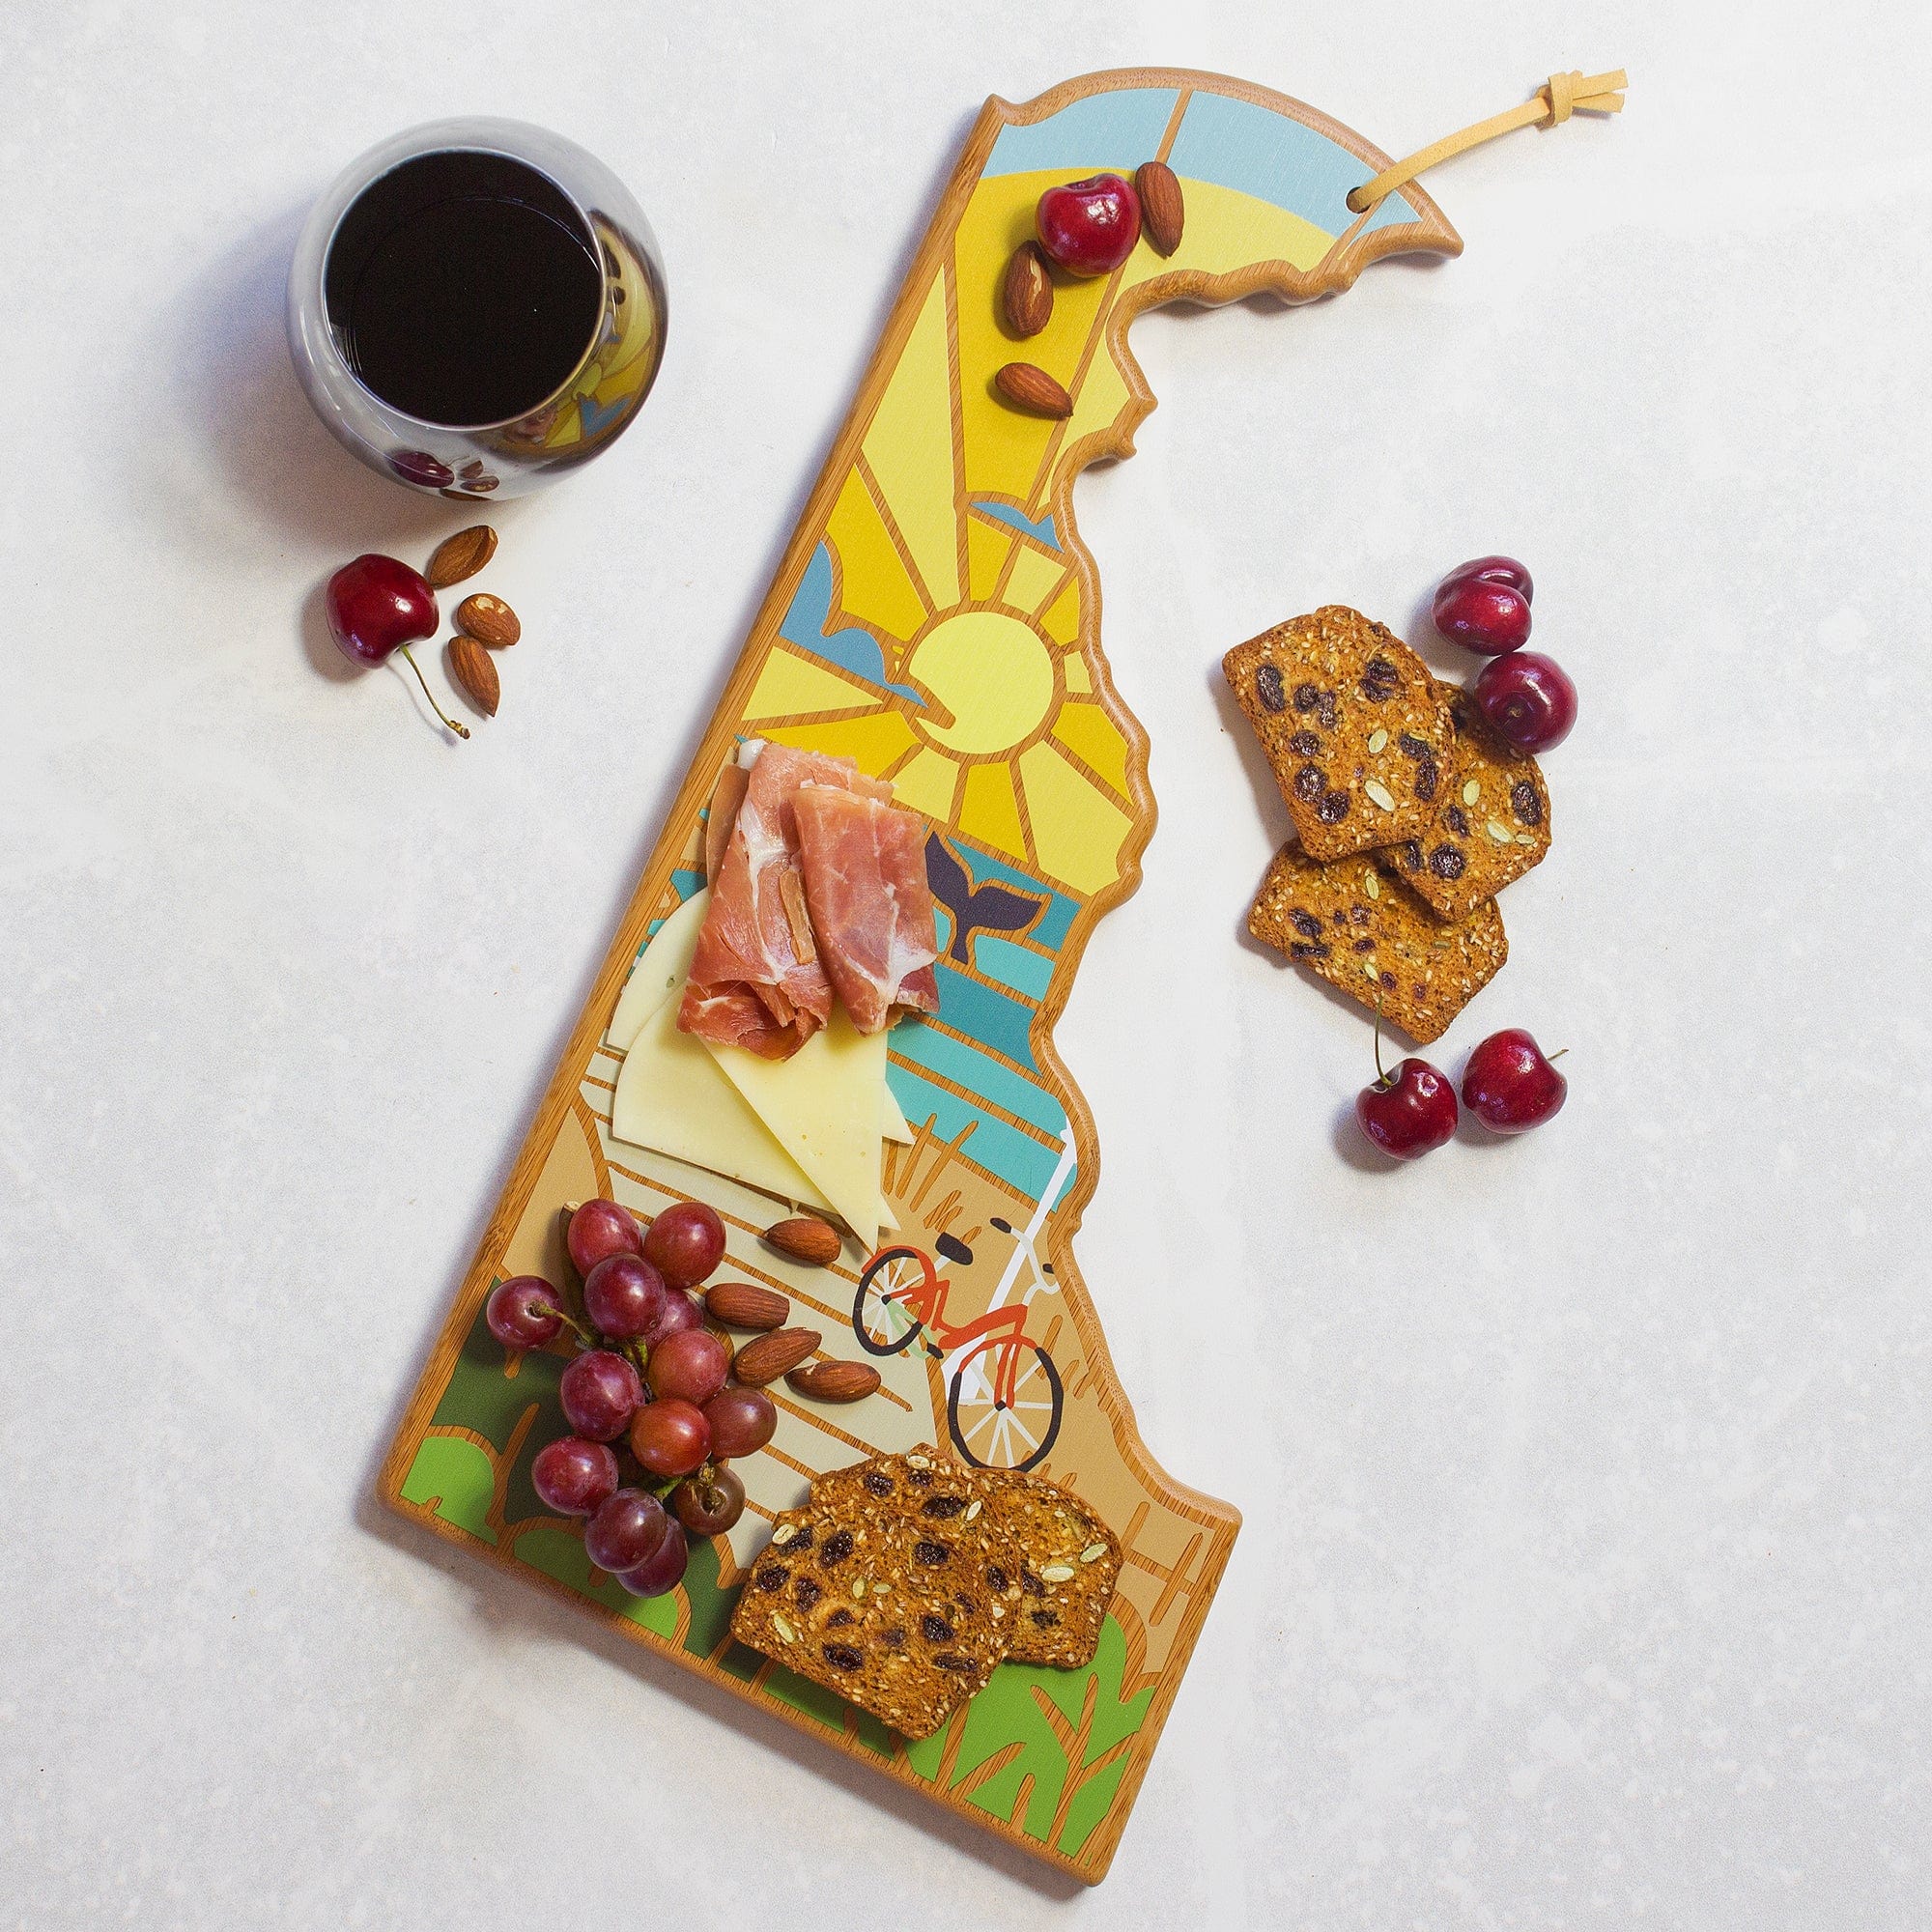 Totally Bamboo Delaware State Shaped Serving and Cutting Board with Artwork by Summer Stokes